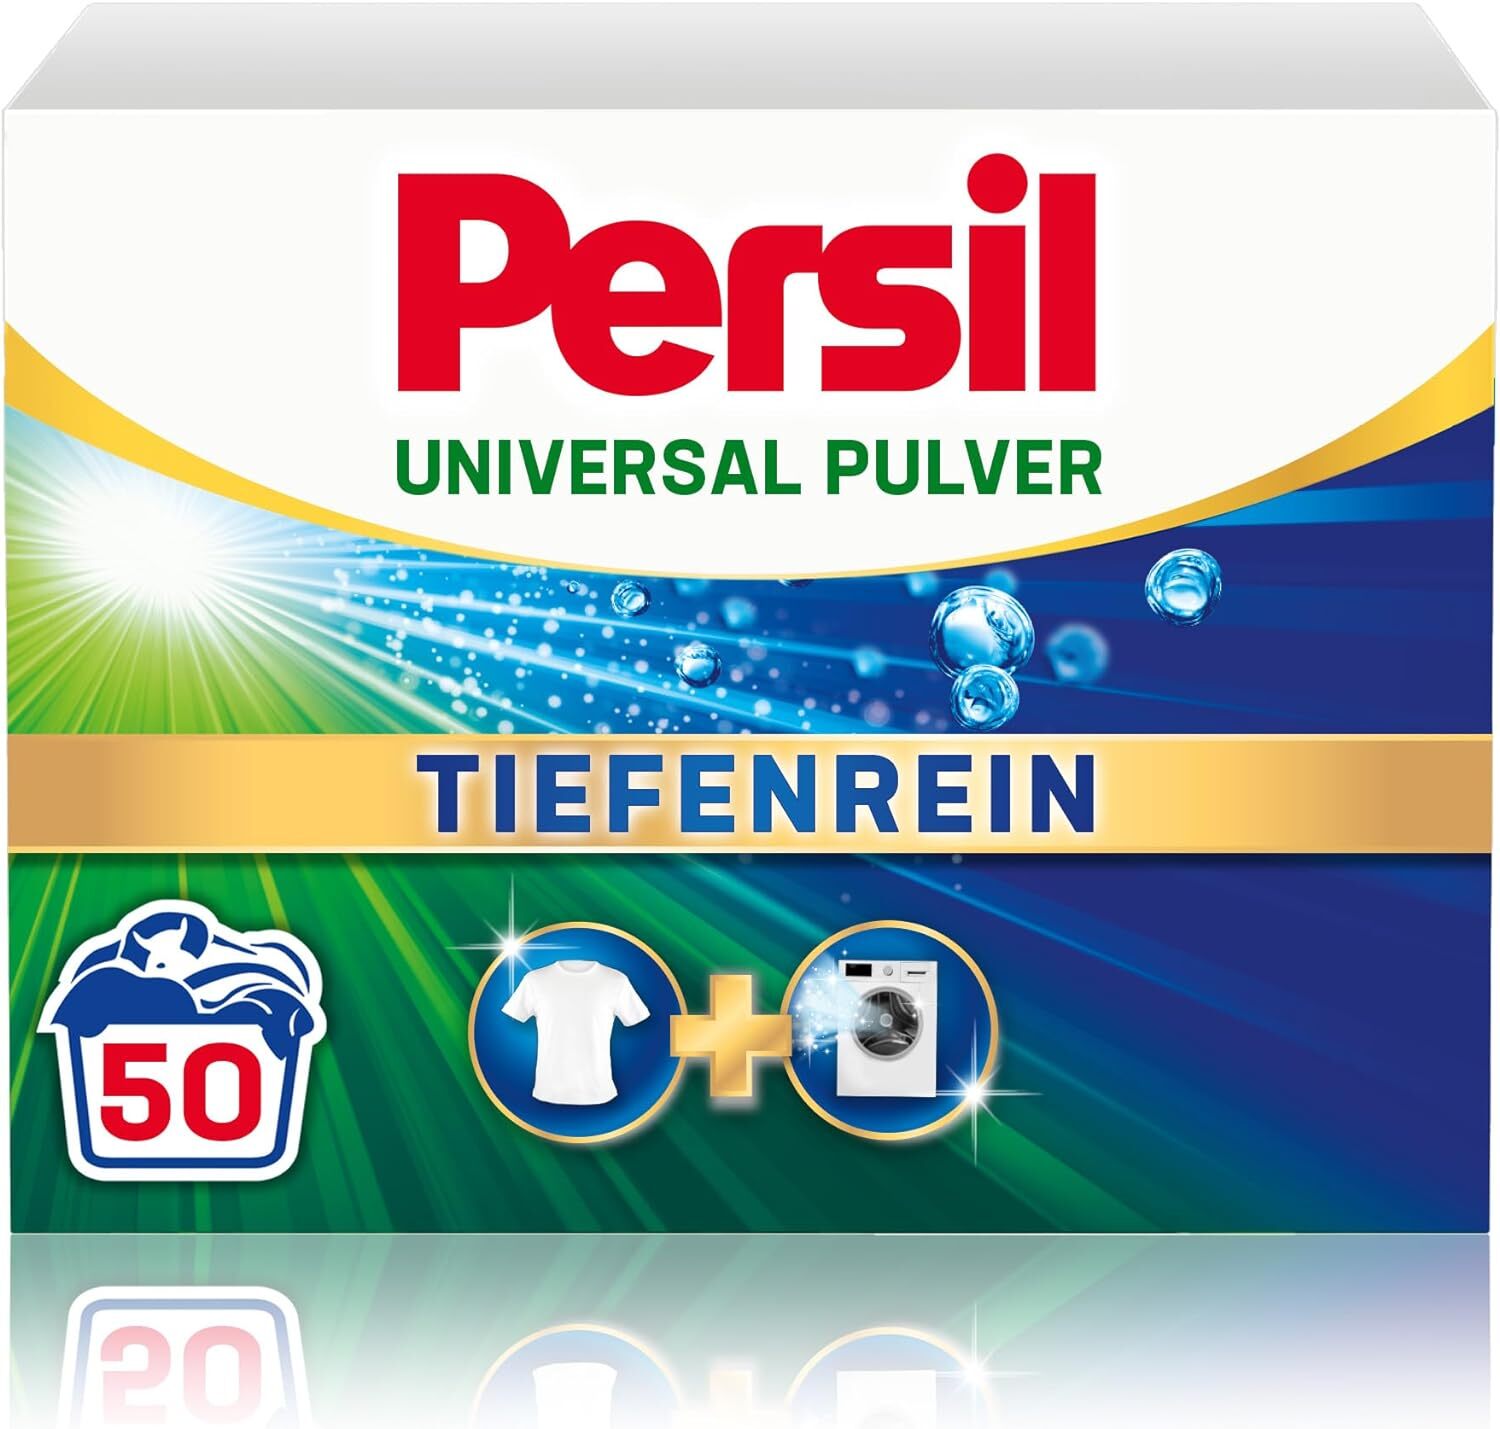 A box of Persil laundry detergent good for 50 loads